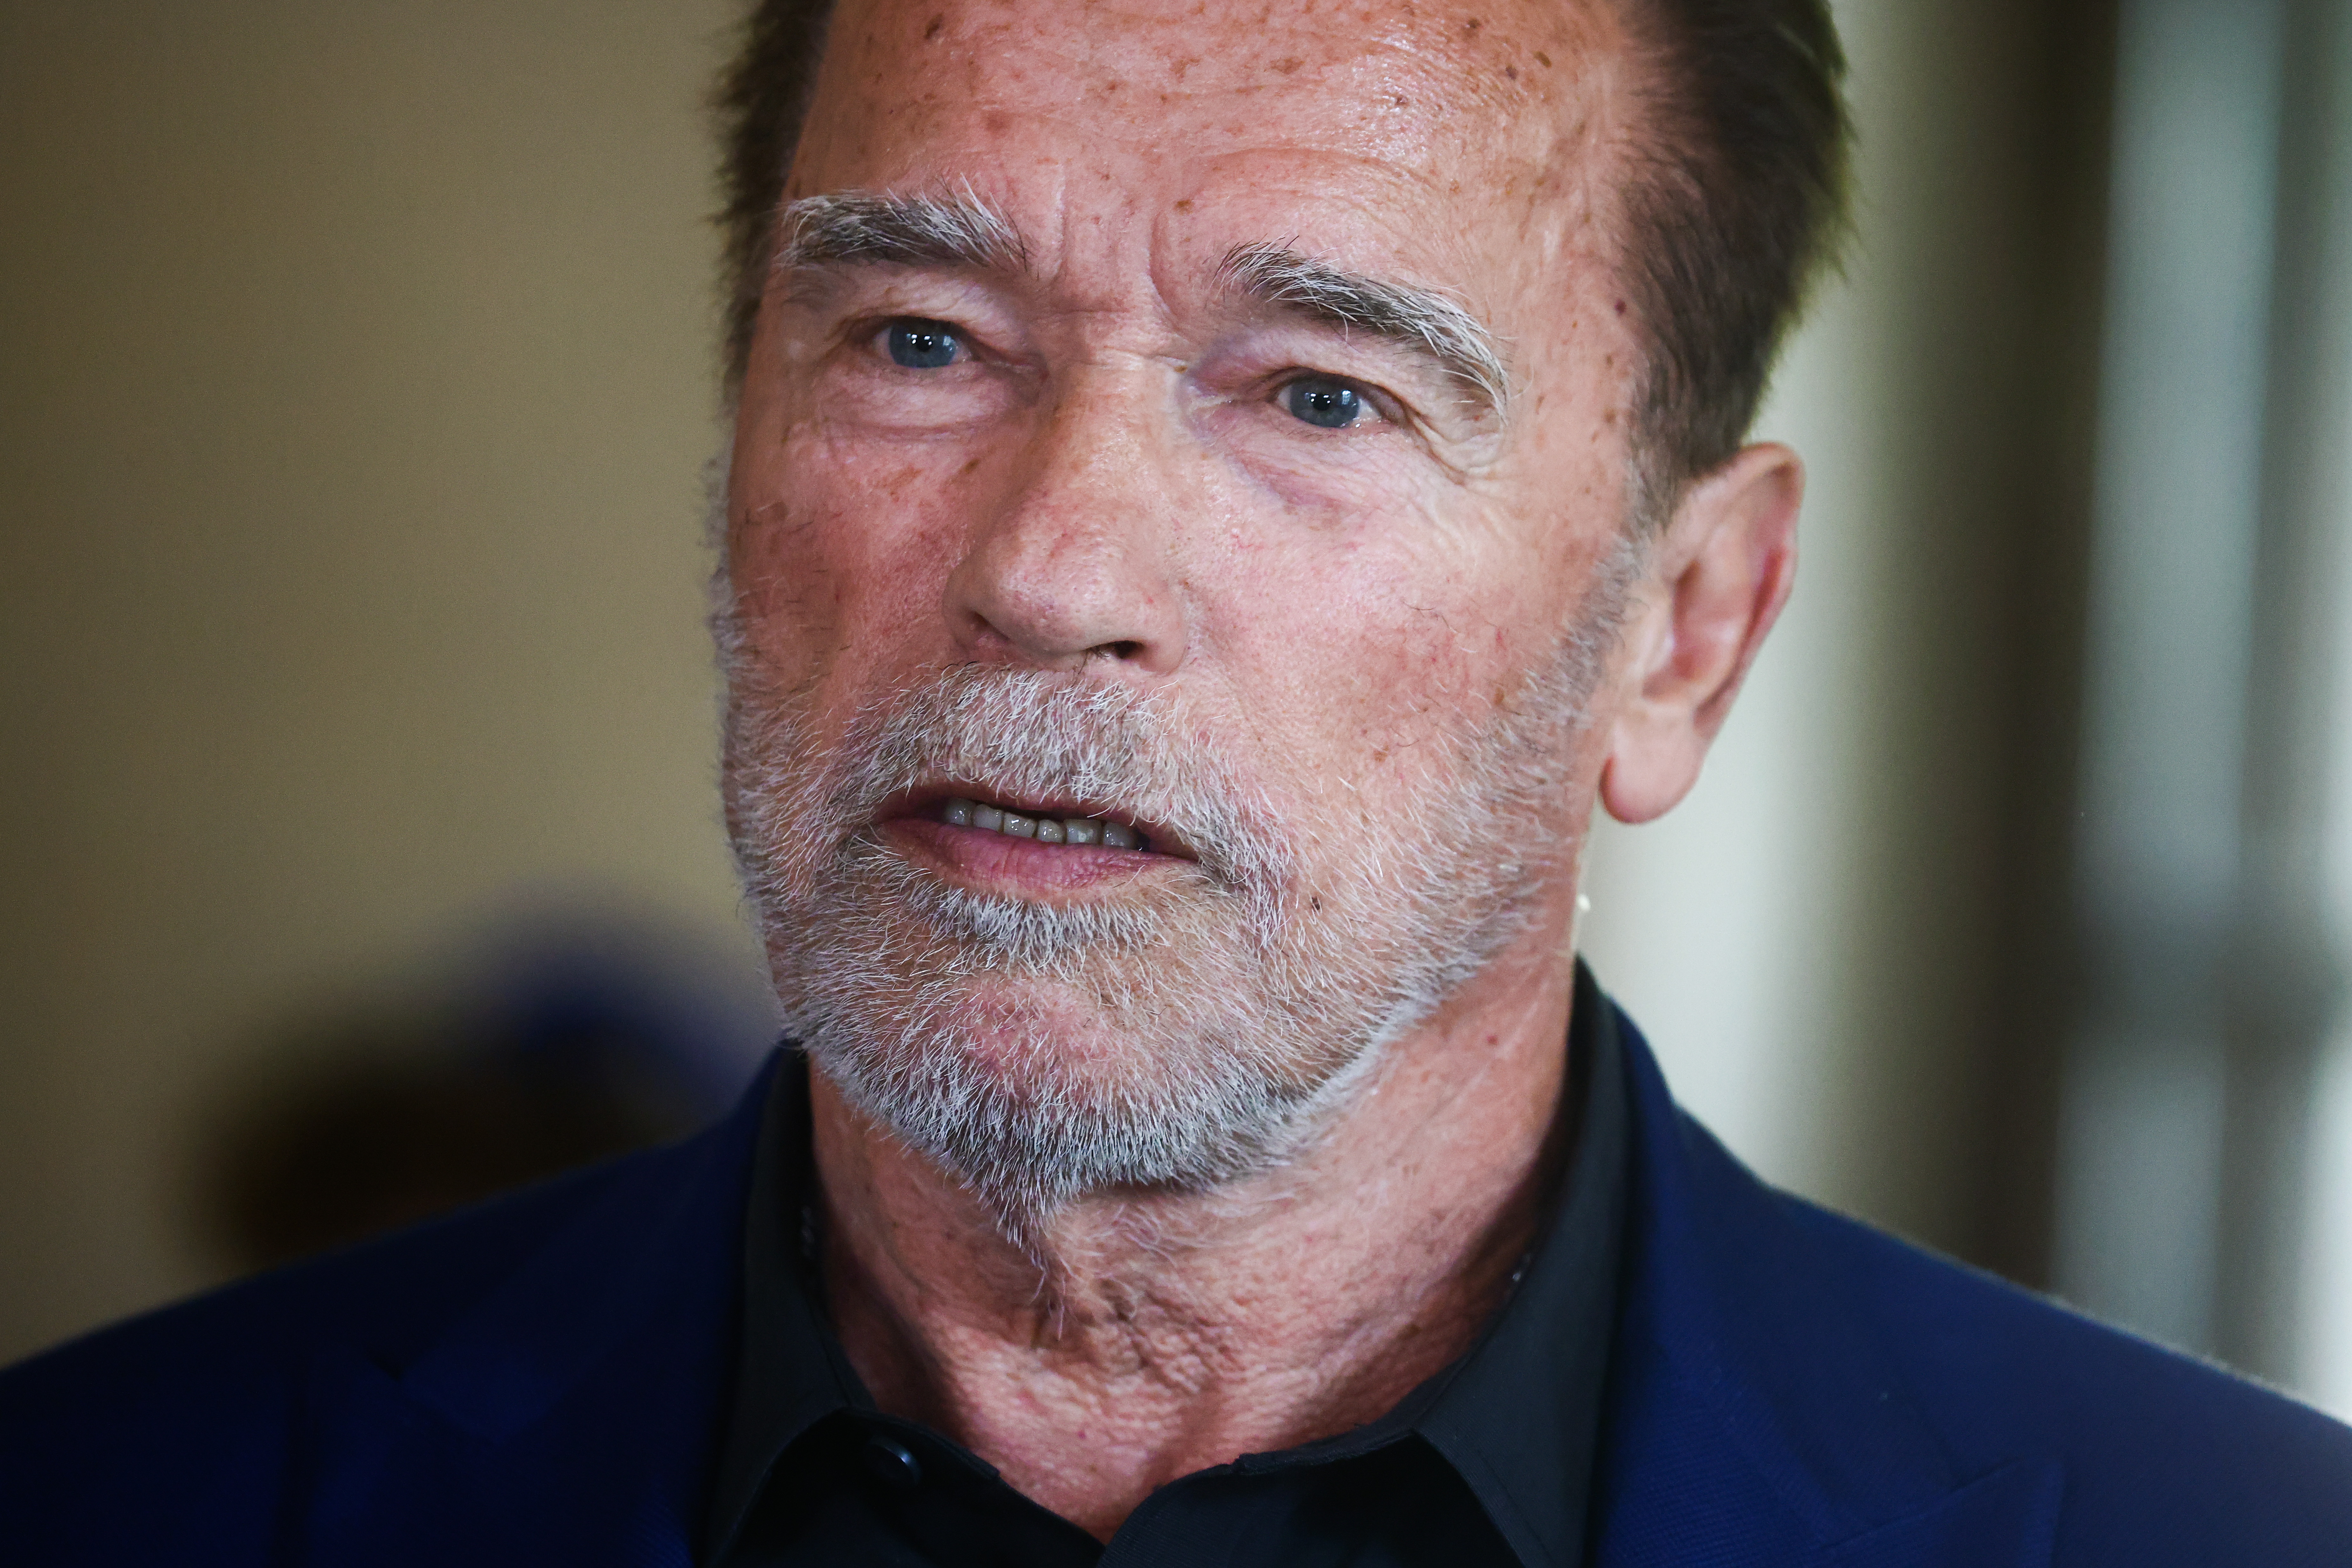 Arnold Schwarzenegger attends an event marking the completion of a 4-acre solar rooftop constructed atop AltaSea's research and development facility, at the Port of Los Angeles, on April 21, 2023, in Los Angeles, California. | Source: Getty Images